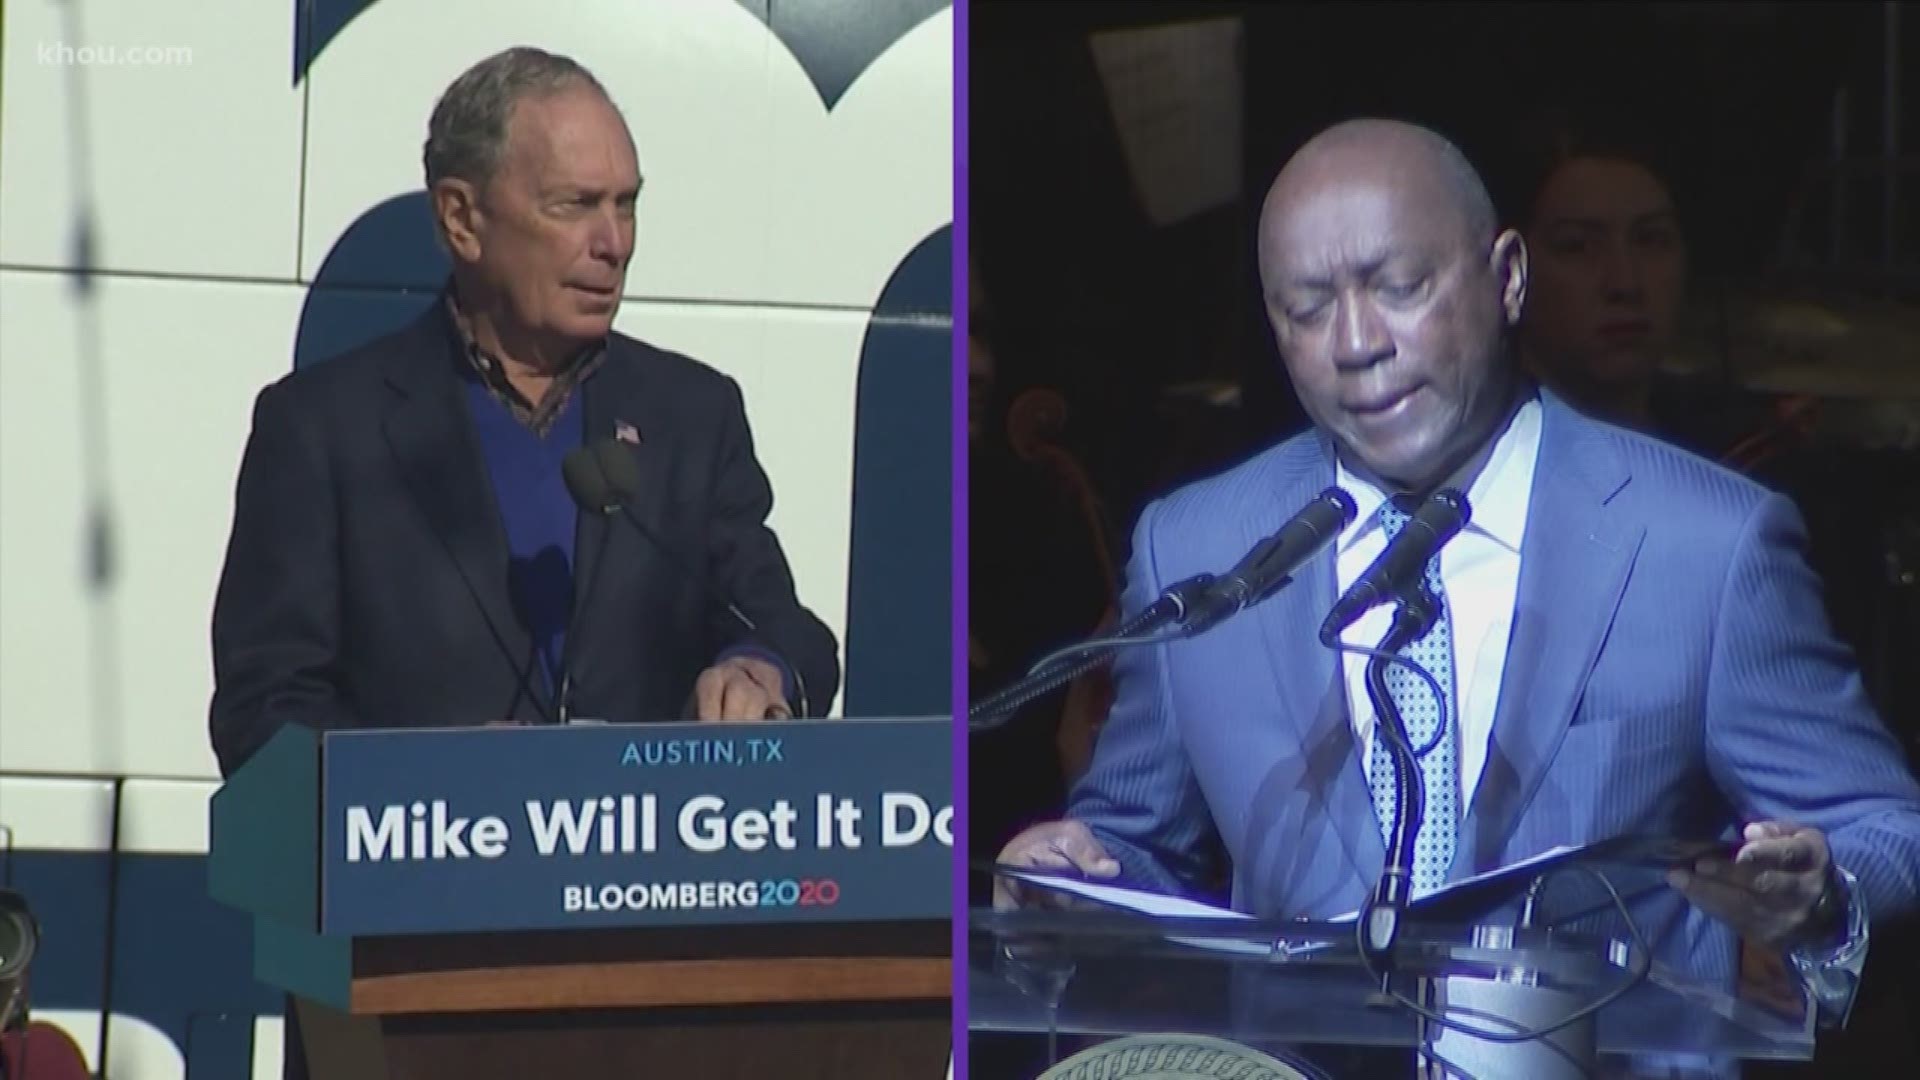 Michael Bloomberg was in Houston Thursday campaigning for president, and Houston mayor Sylvester Turner expressed his support for the candidate.